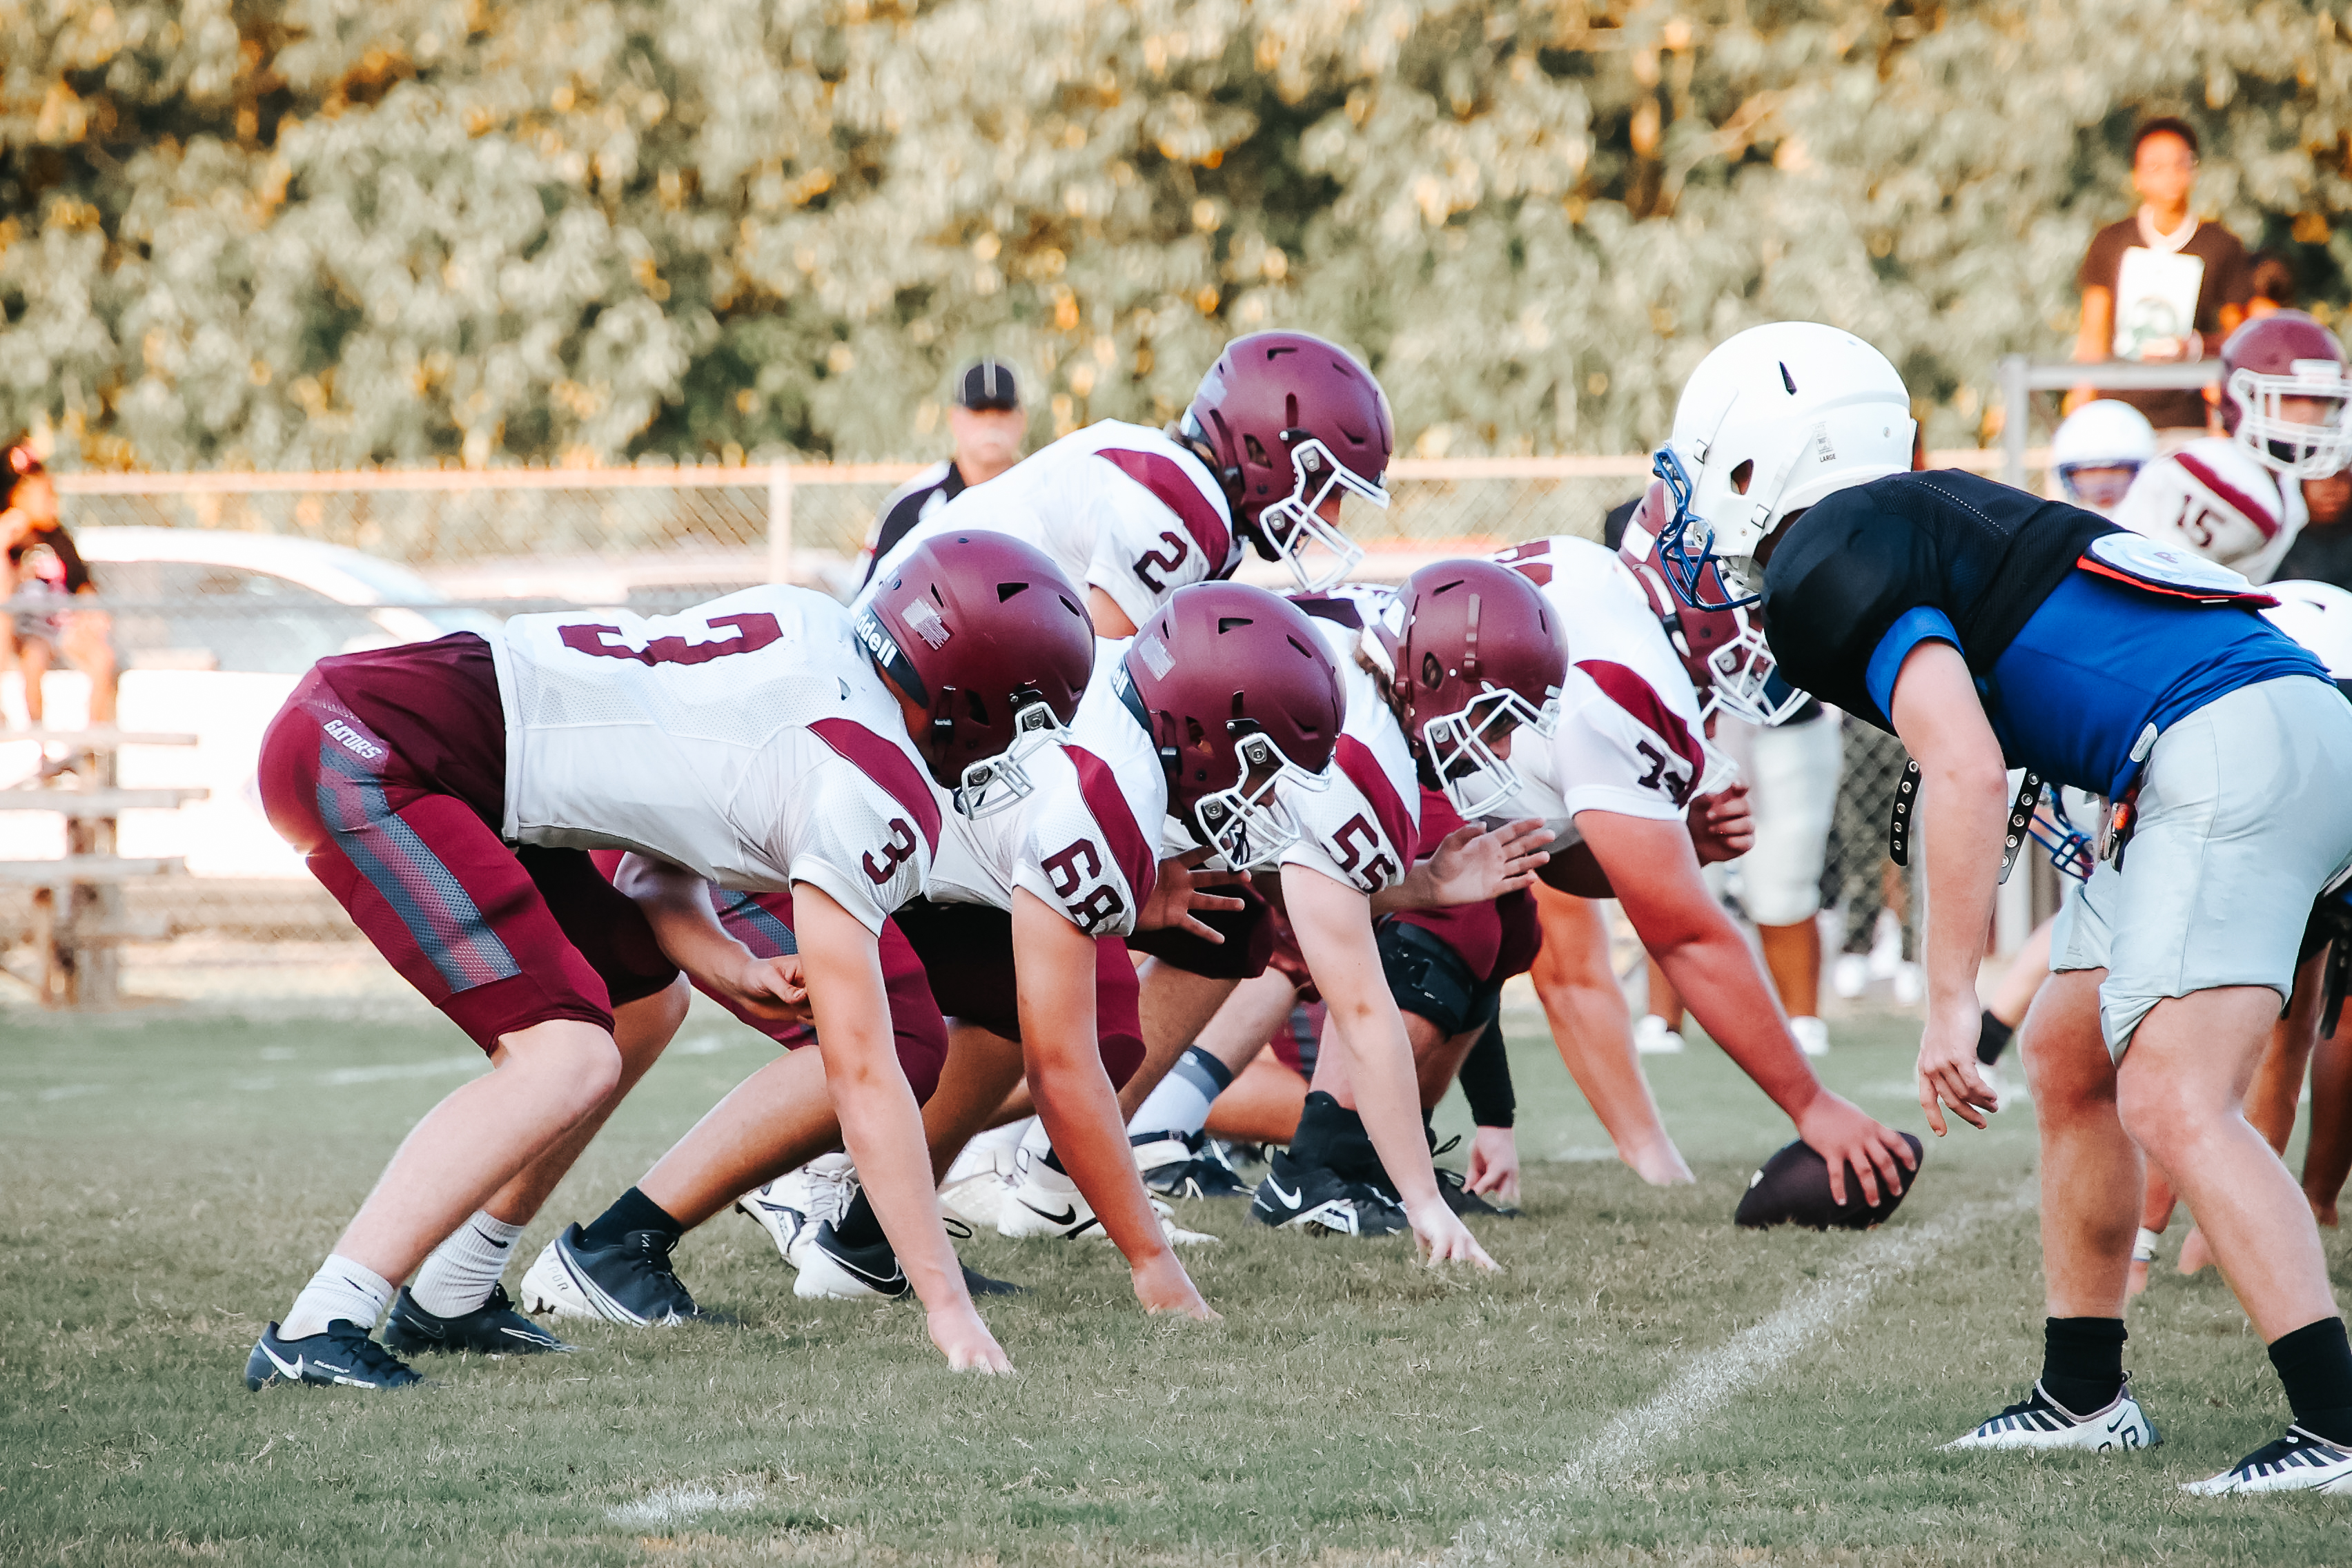 Football players on the line of scrimmage ready for a play